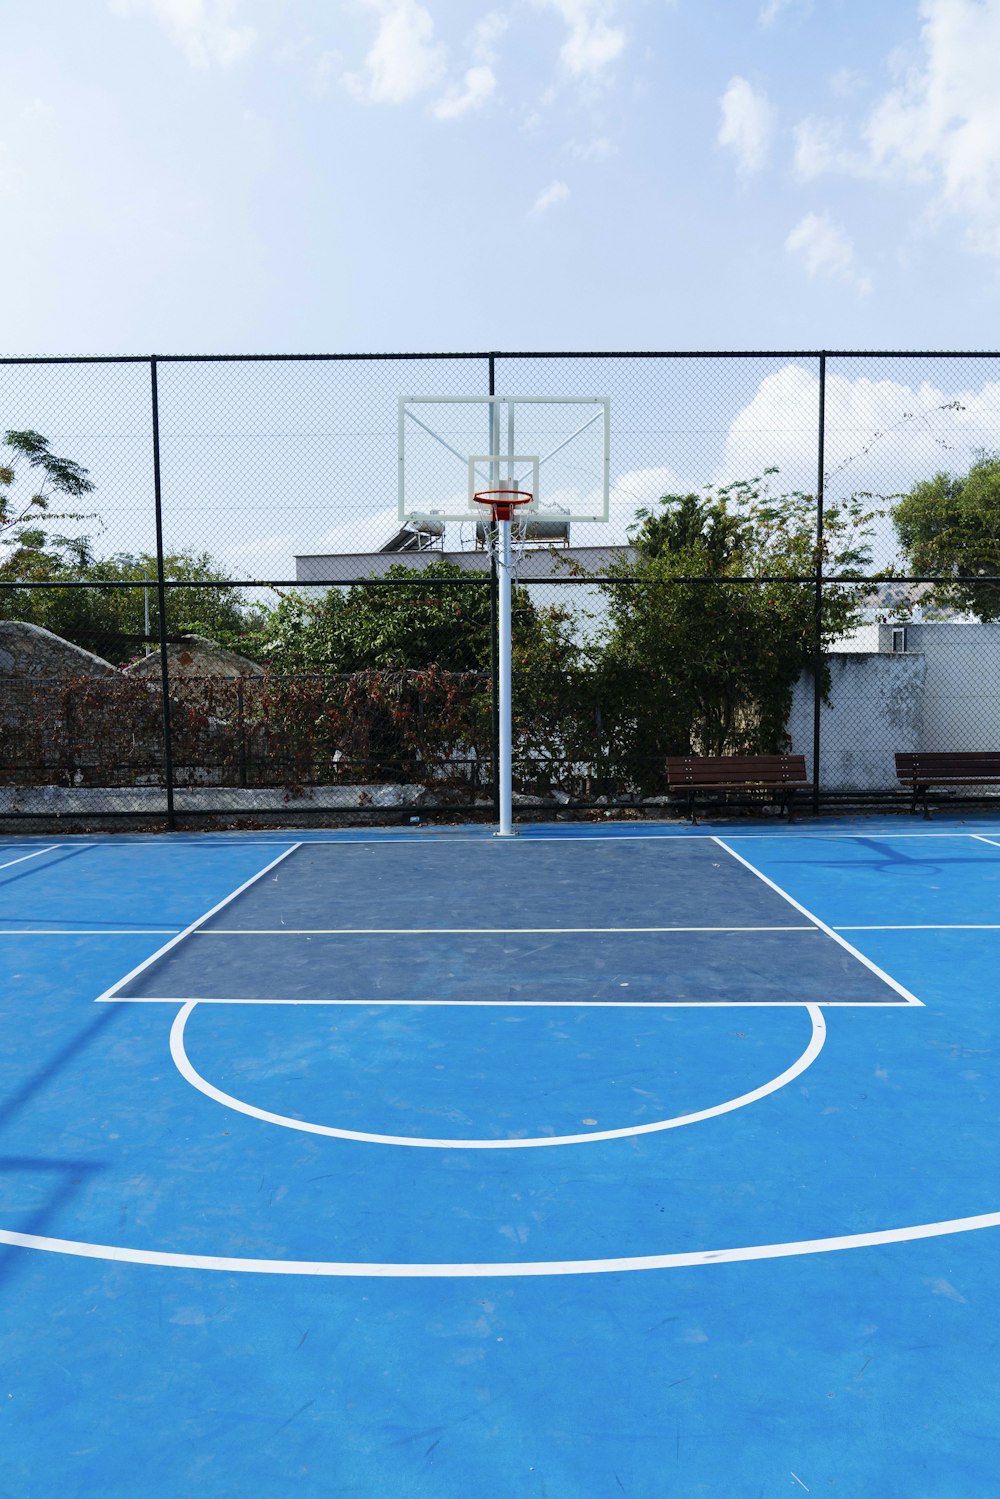 portable basketball system during daytime